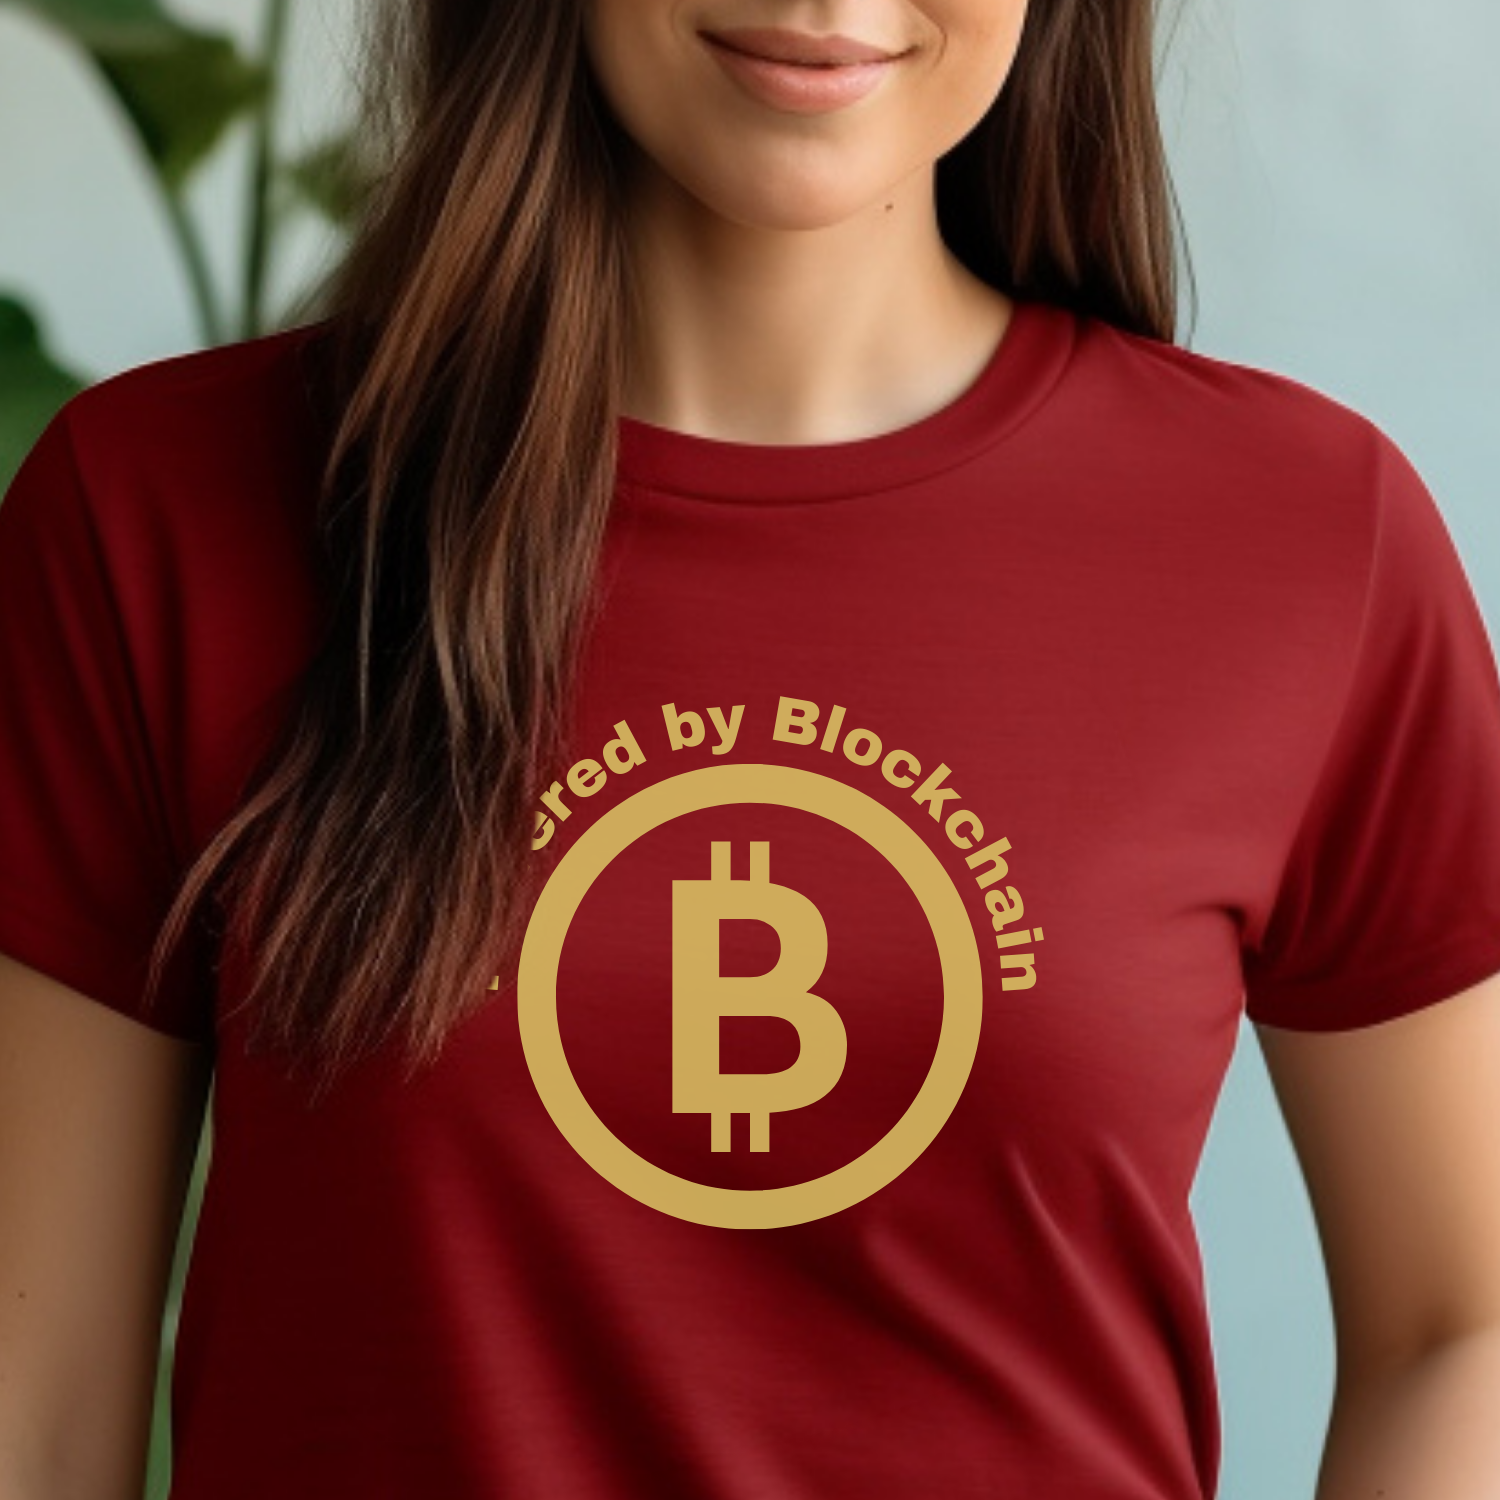 Canvas Red crypto t-shirt highlights the bitcoin message. Powered by Blockchain